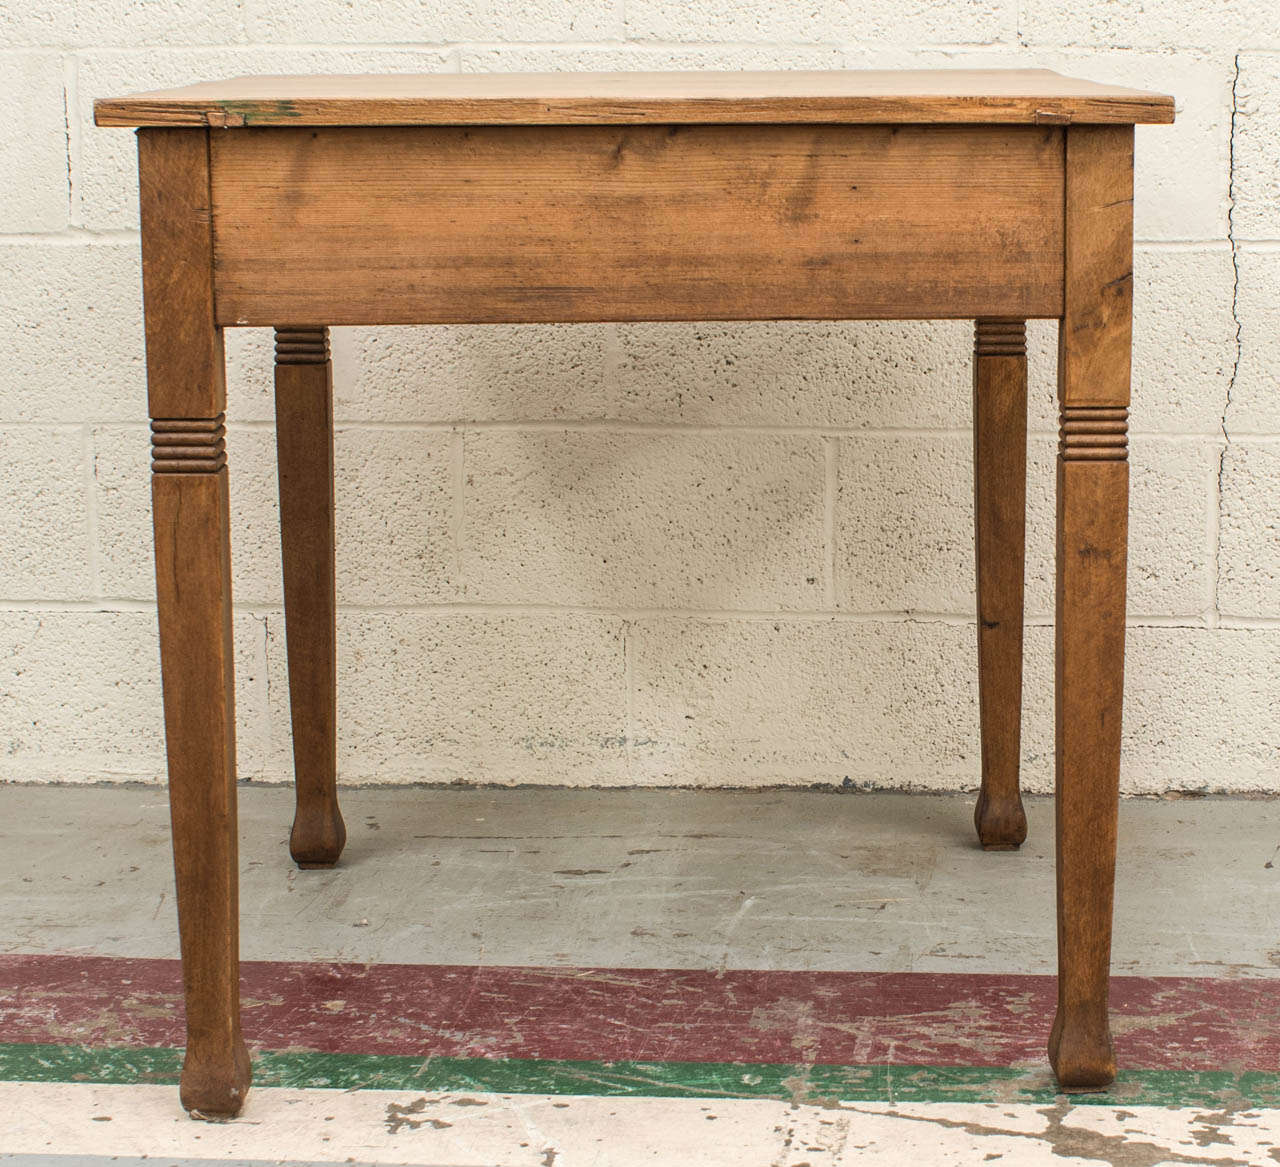 A great little table of perfect proportions for card games, kitchen use or as an occasional table almost anywhere.  The pine top and aprons are supported by four beechwood legs featuring reeded incisions and charming flared feet.